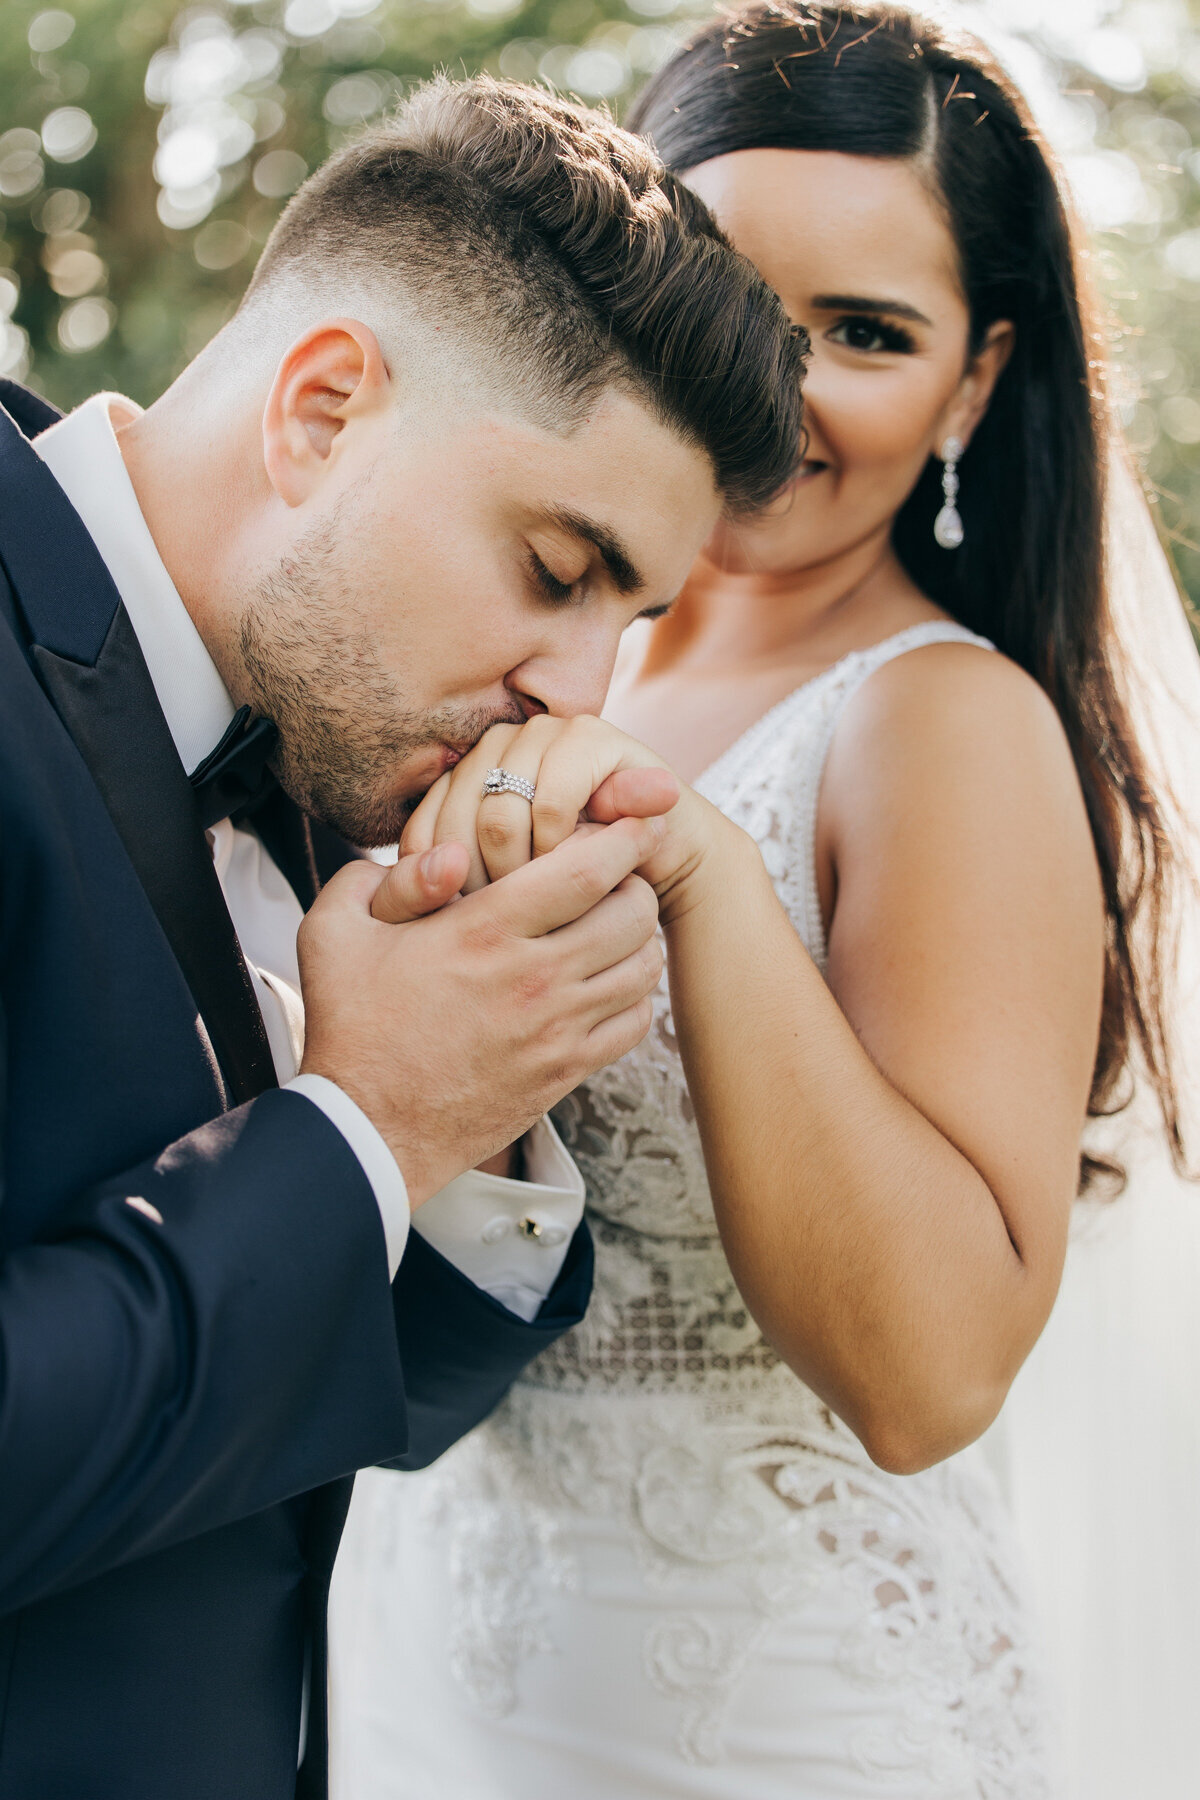 A groom kissing his bride's left hand